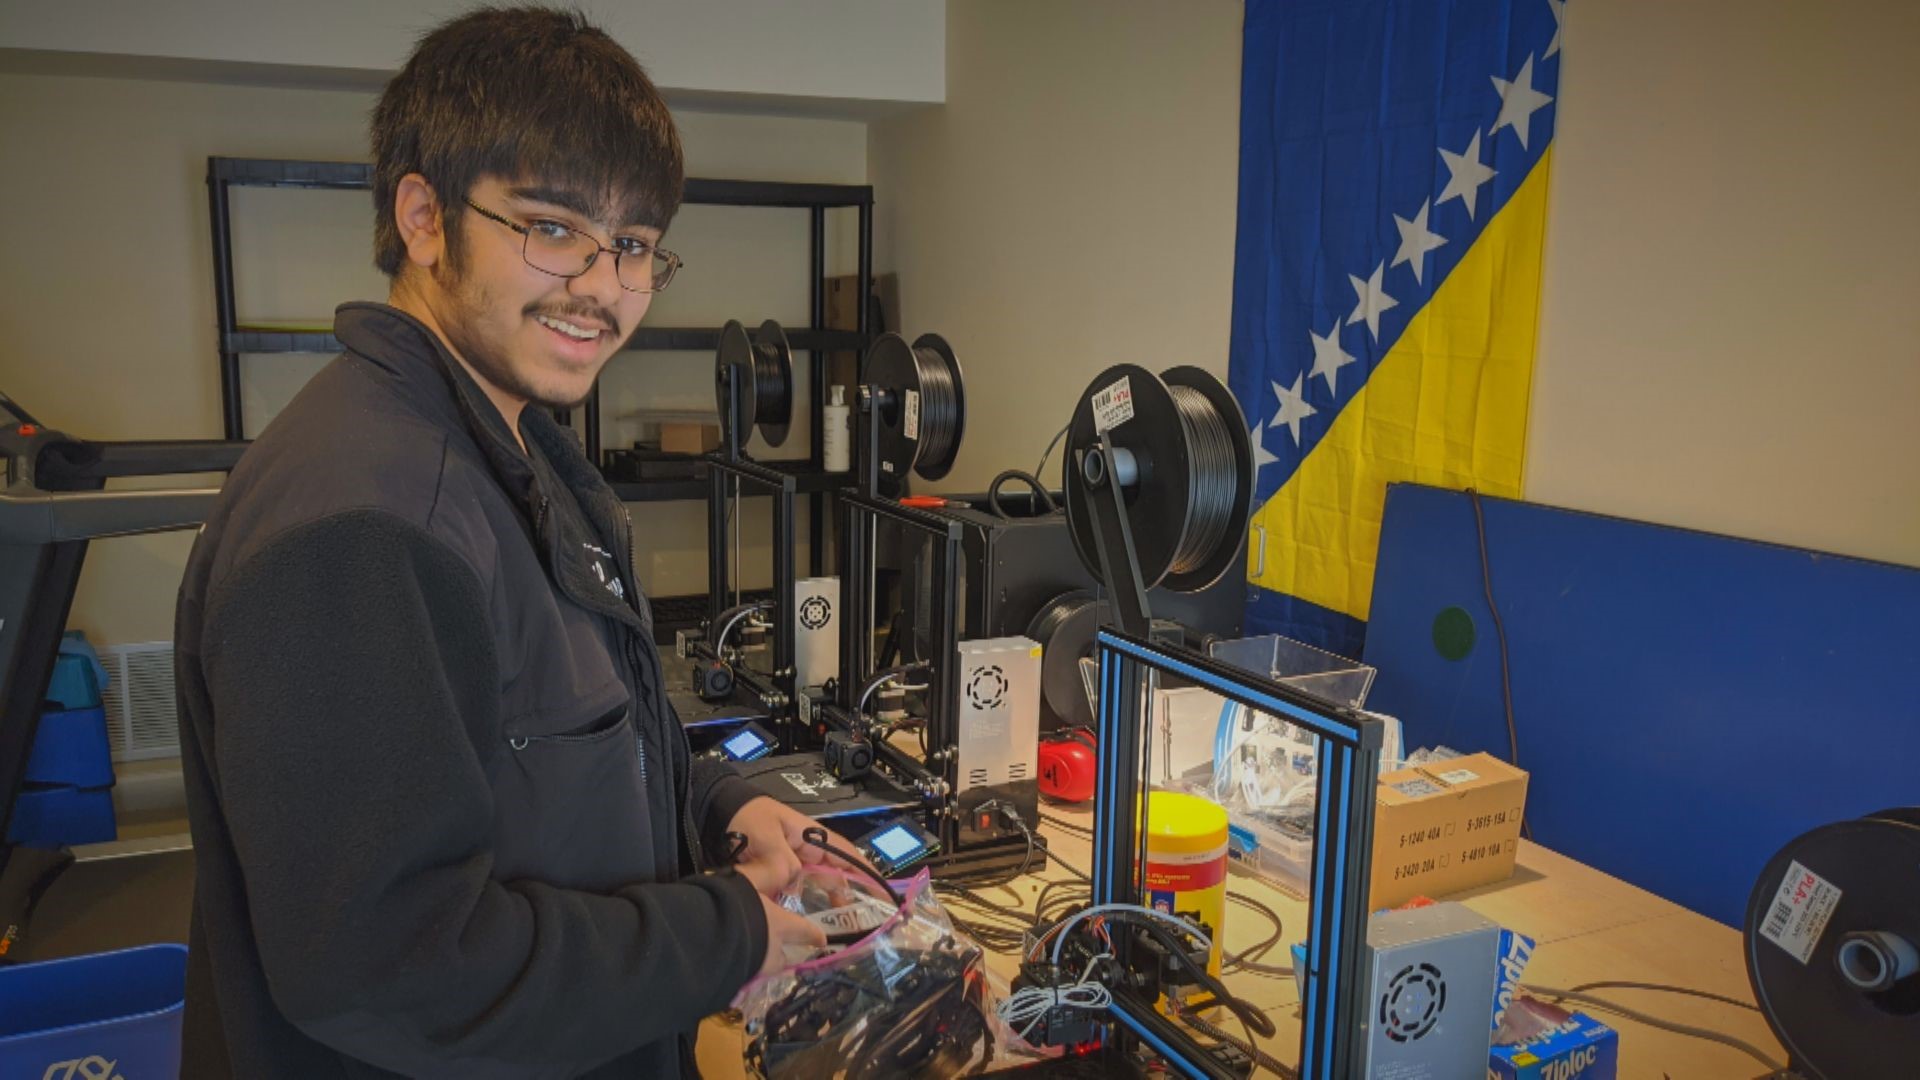 High School sophomore Arjun Oberoi has turned his basement into a coronavirus armor factory, printing 250 face shields for hospitals, police and fire departments.